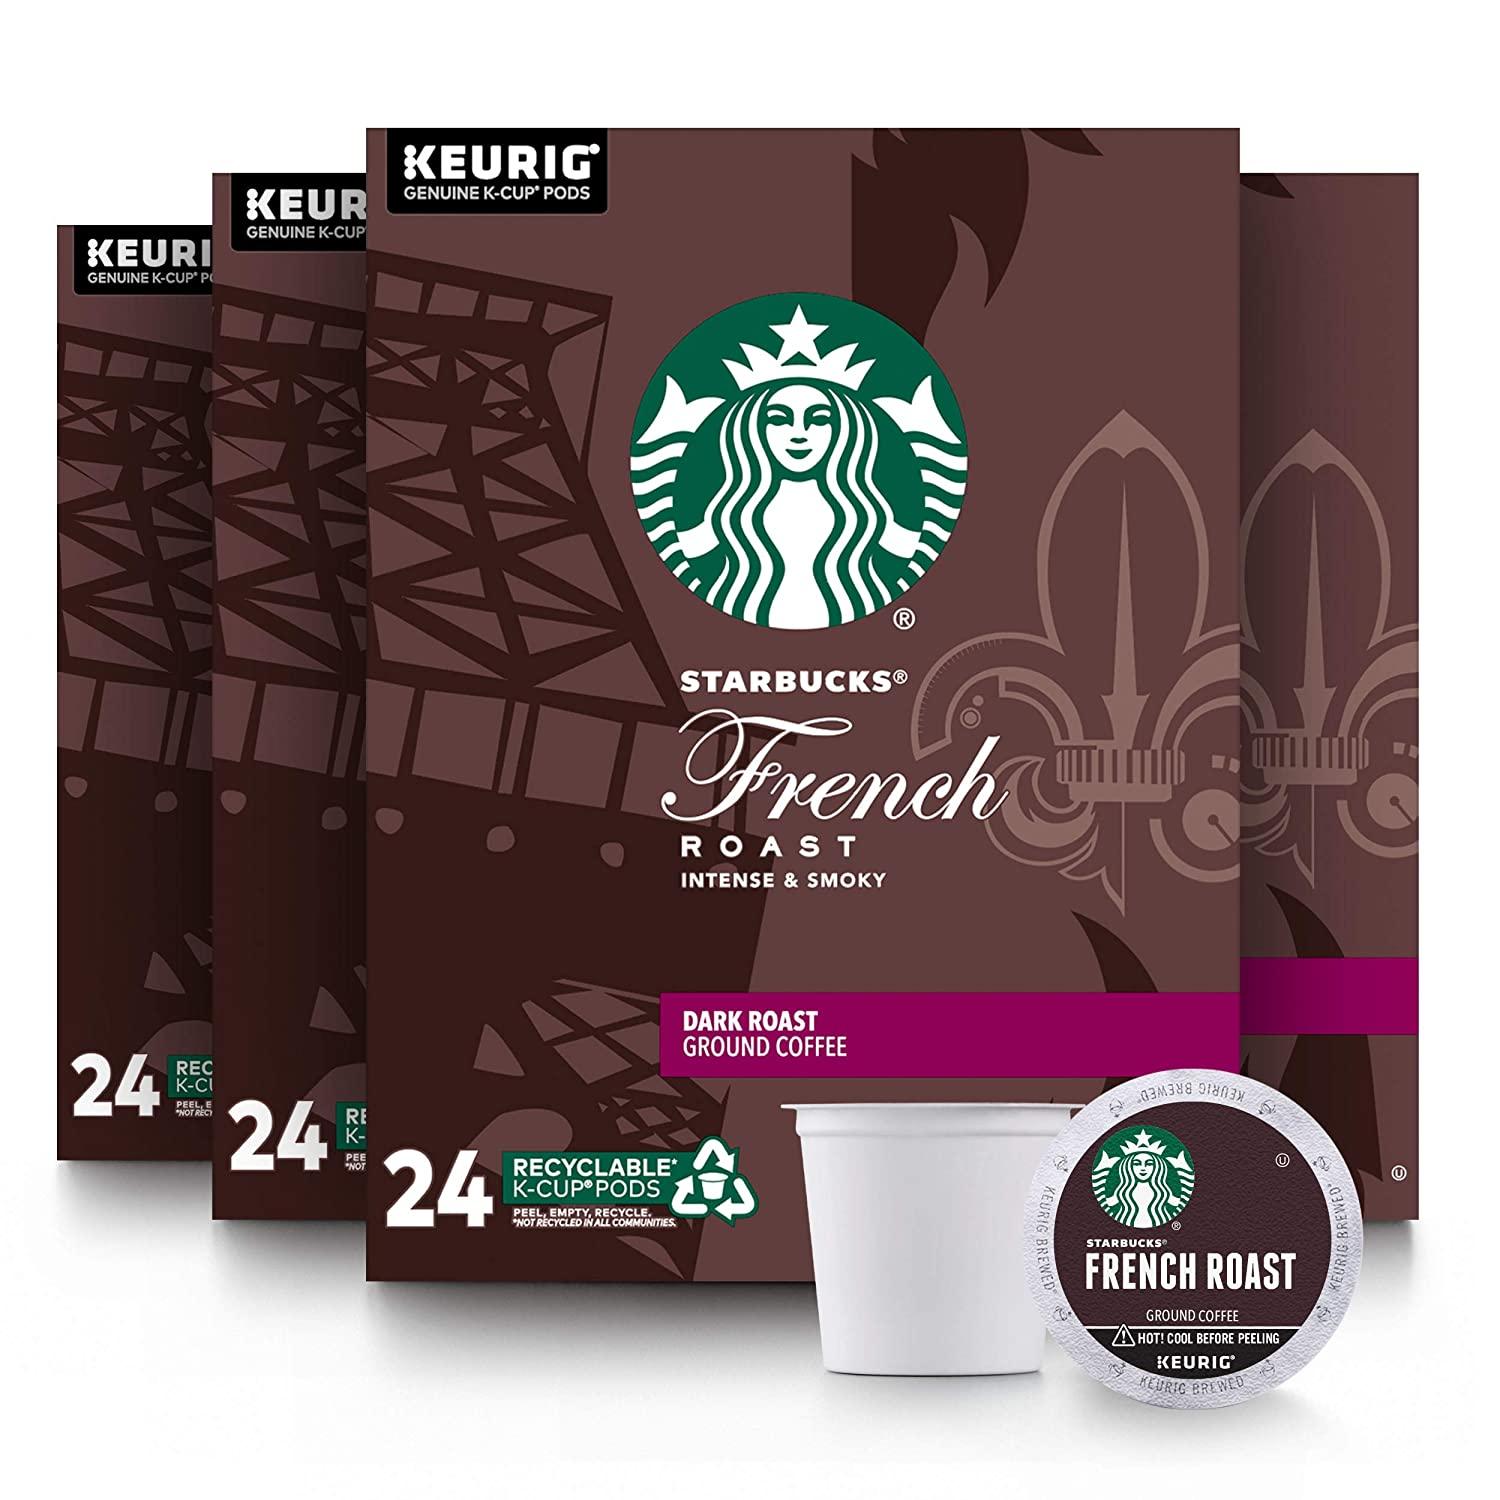 96 Starbucks Dark Roast K-Cup Coffee Pods for $37.97 Shipped